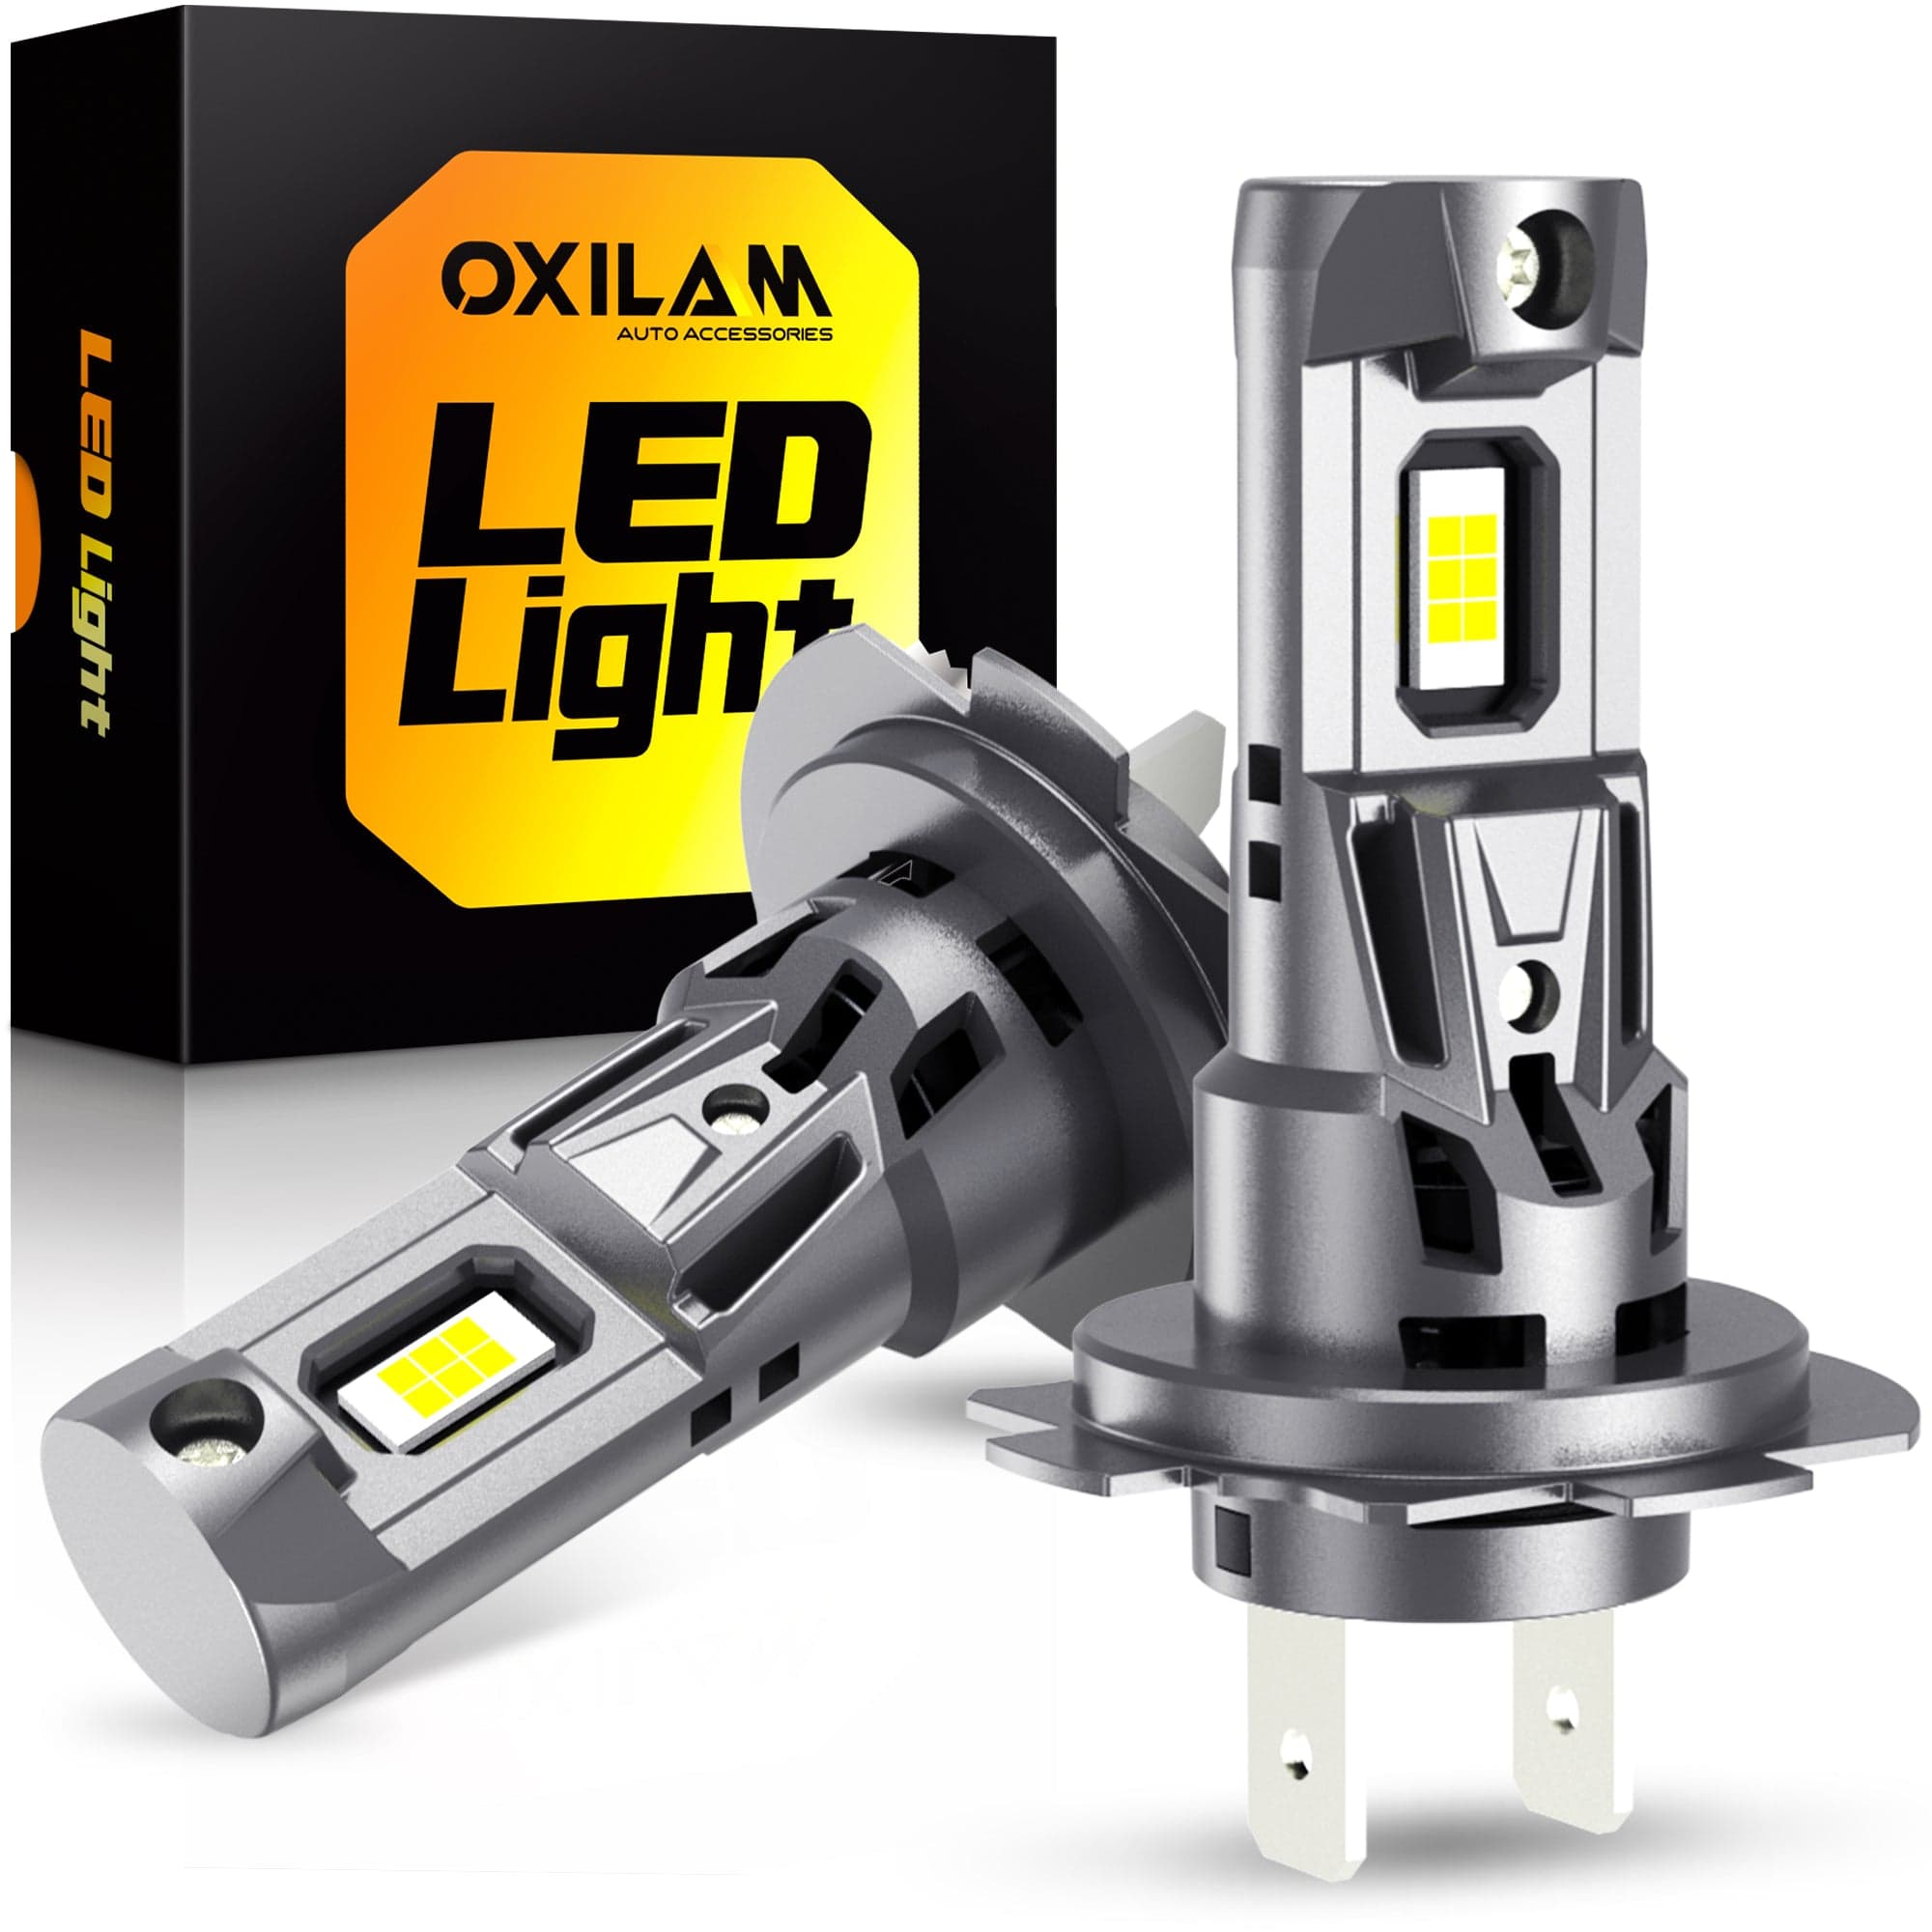 Oxilam Motor Vehicle Lighting OXILAM Newest H7 LED Bulb 22000LM 700% Brighter, 1:1 Size No Adapter Required